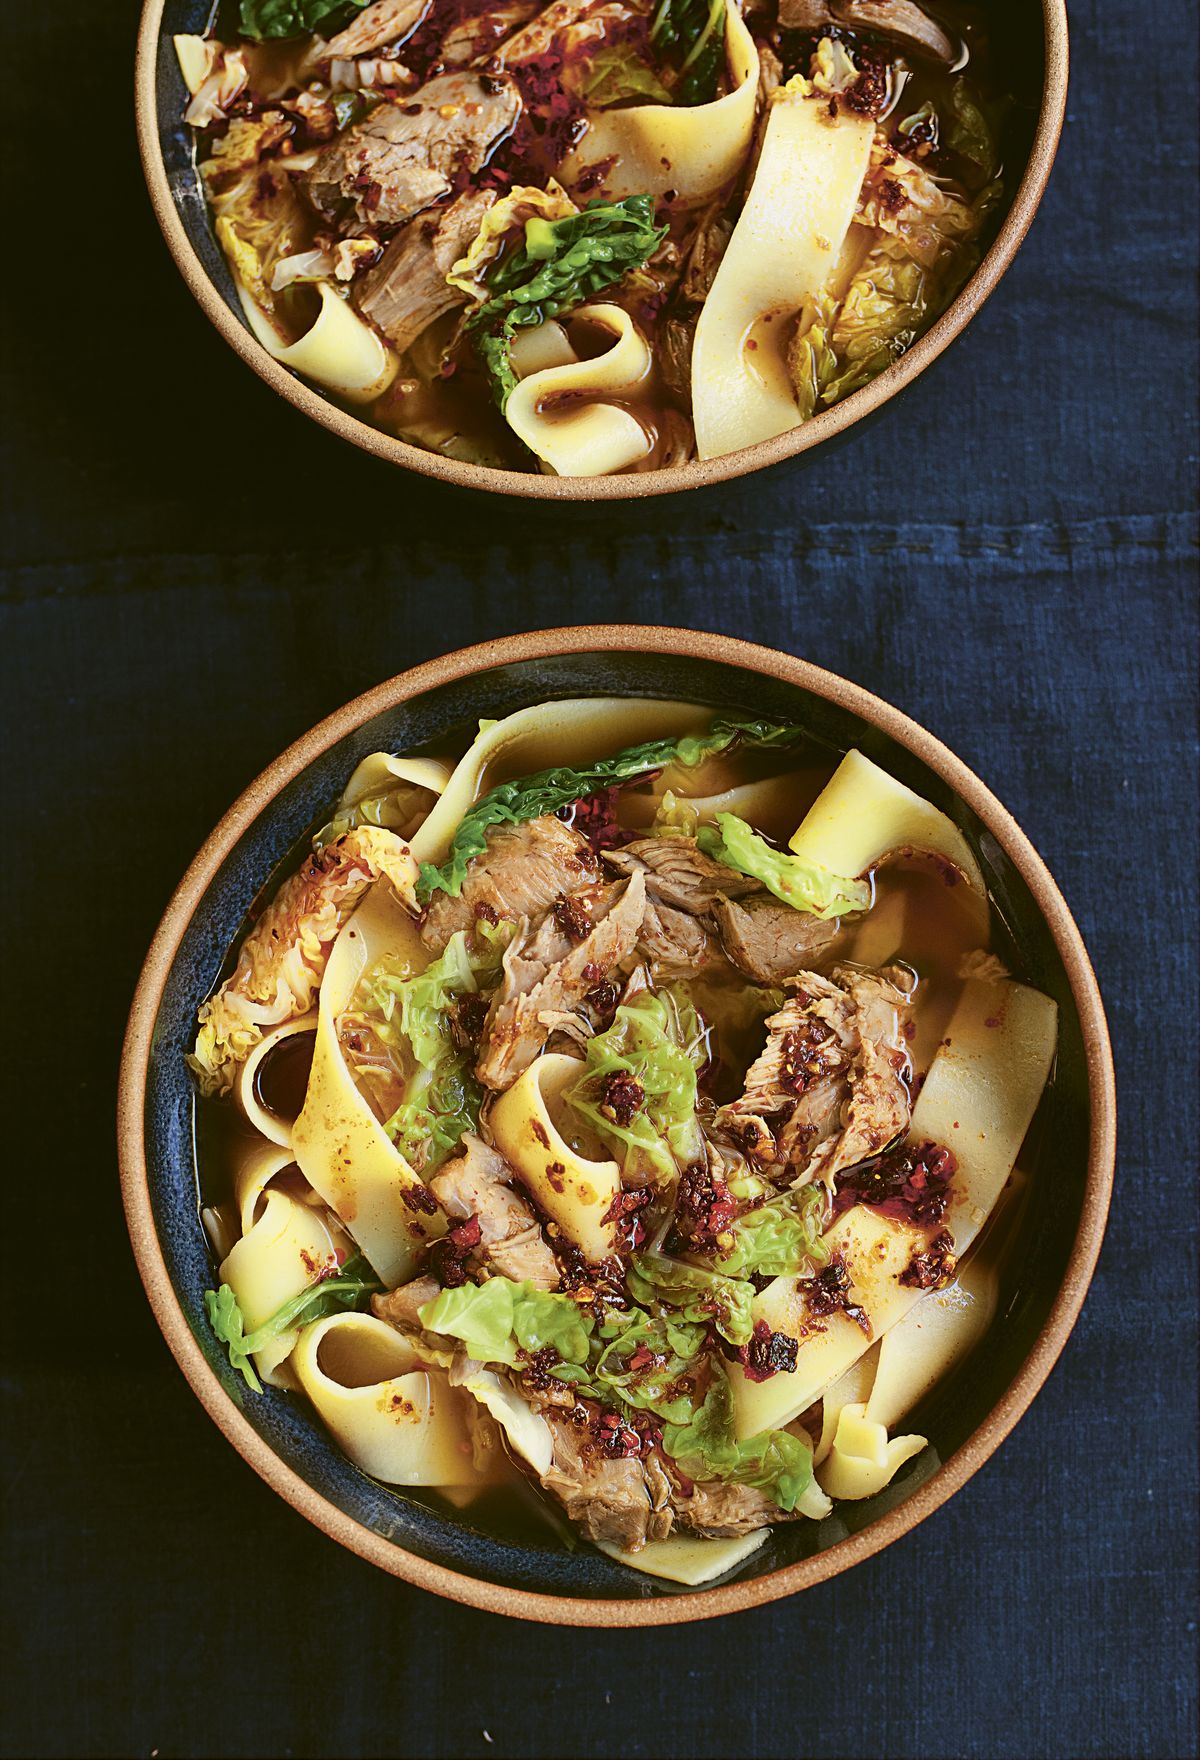 Nigella Lawson’s Wide Noodles with Lamb Shank in Aromatic Broth